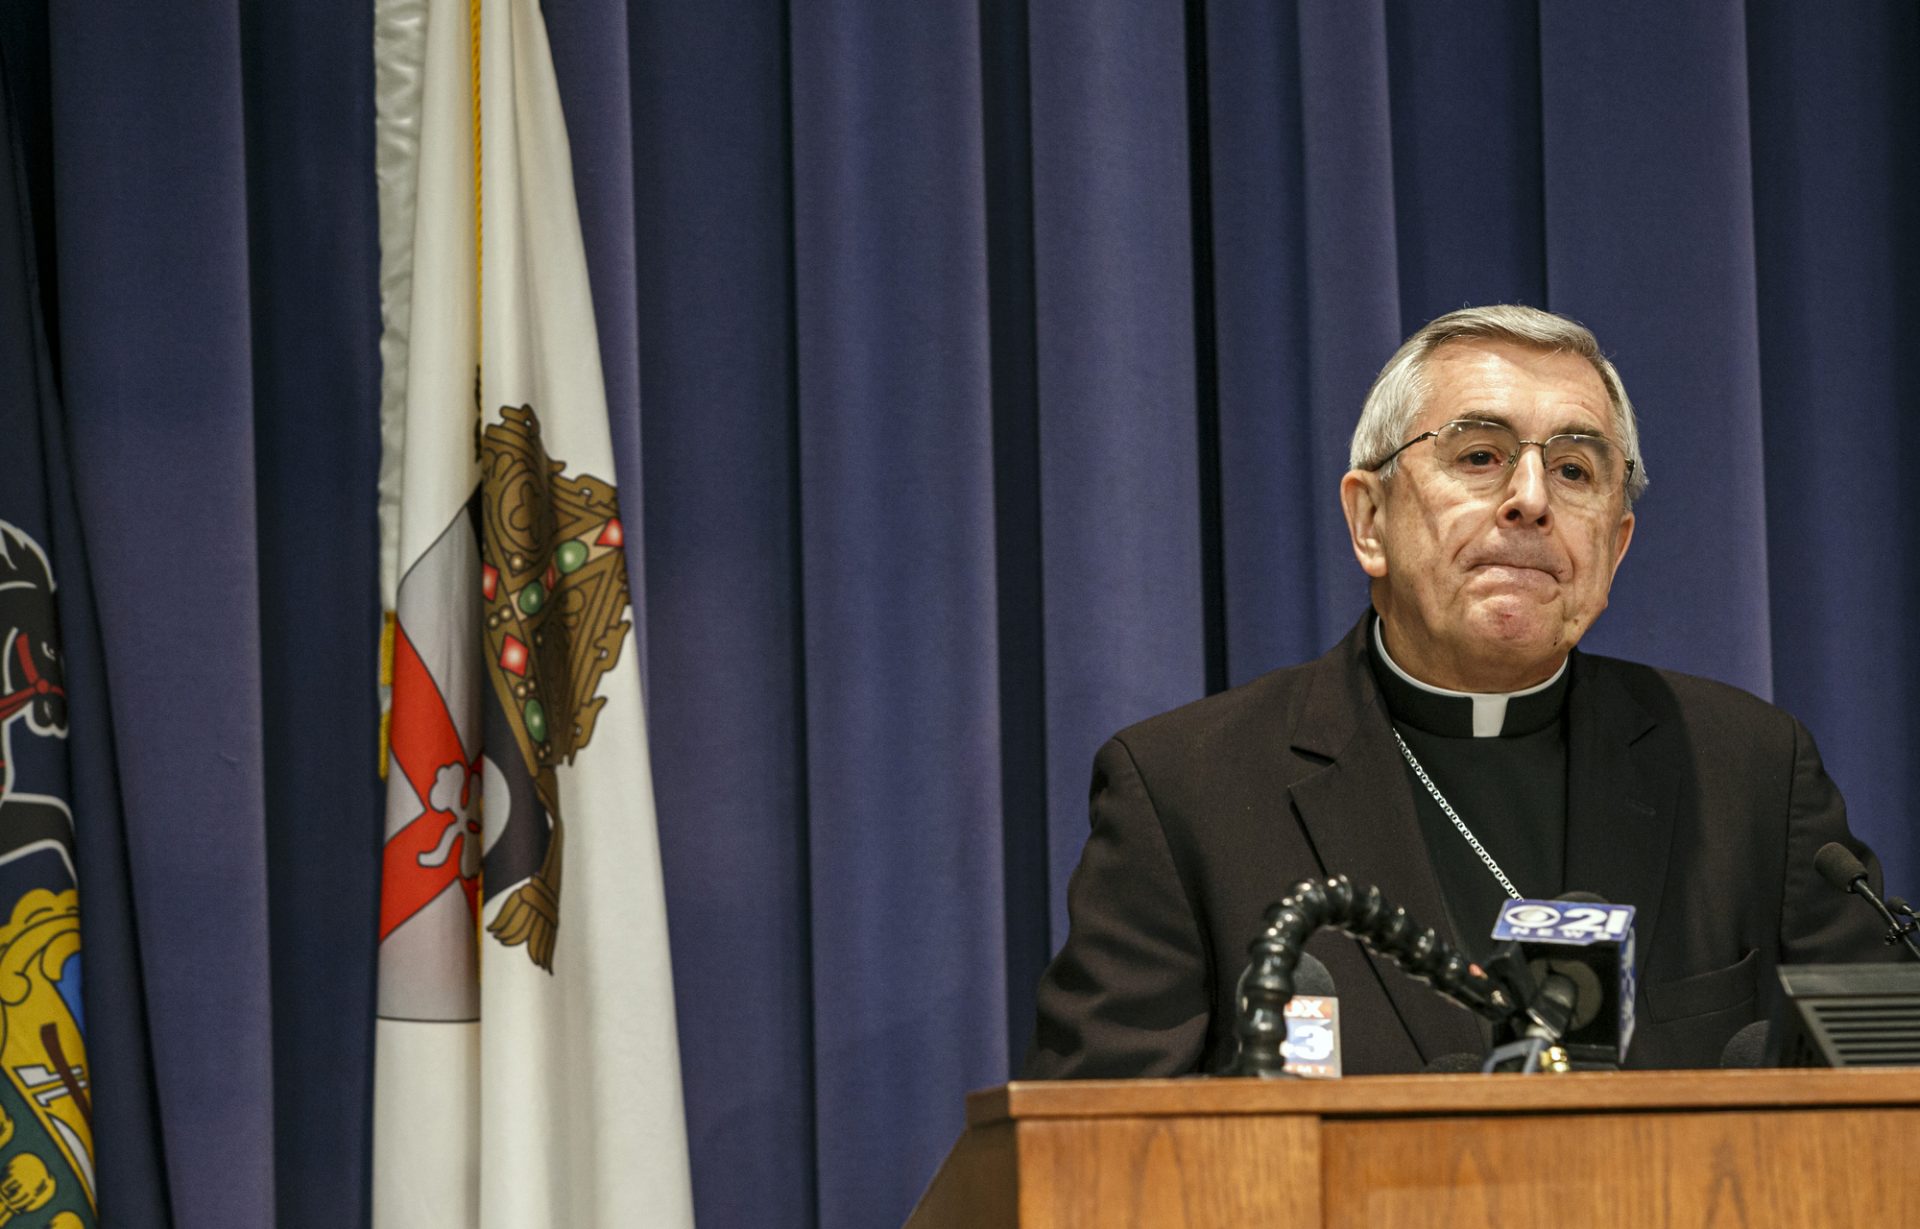 Bishop Ronald Gainer announces the Harrisburg Catholic Diocese is filing for bankruptcy protection on Feb. 19, 2020.